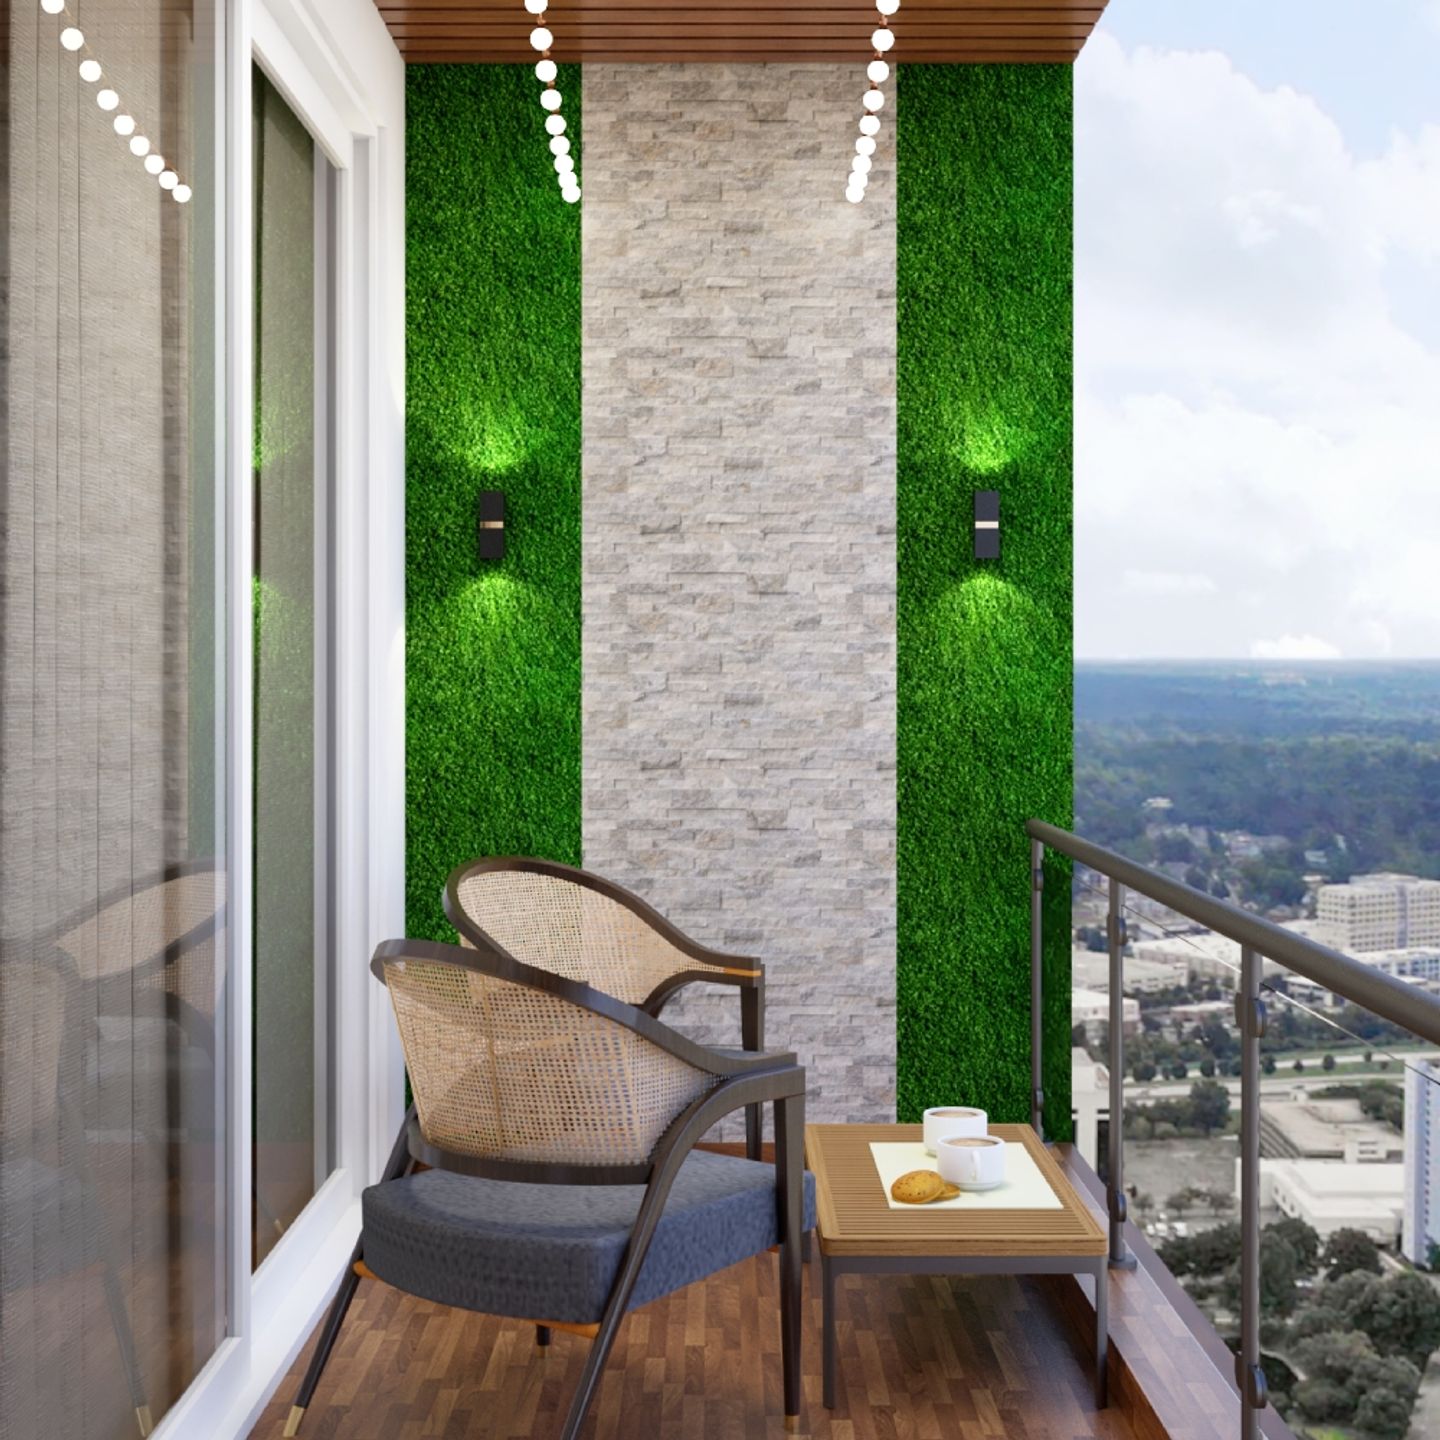 Tropical Balcony Design With Turf Grass And Stone Wallpaper